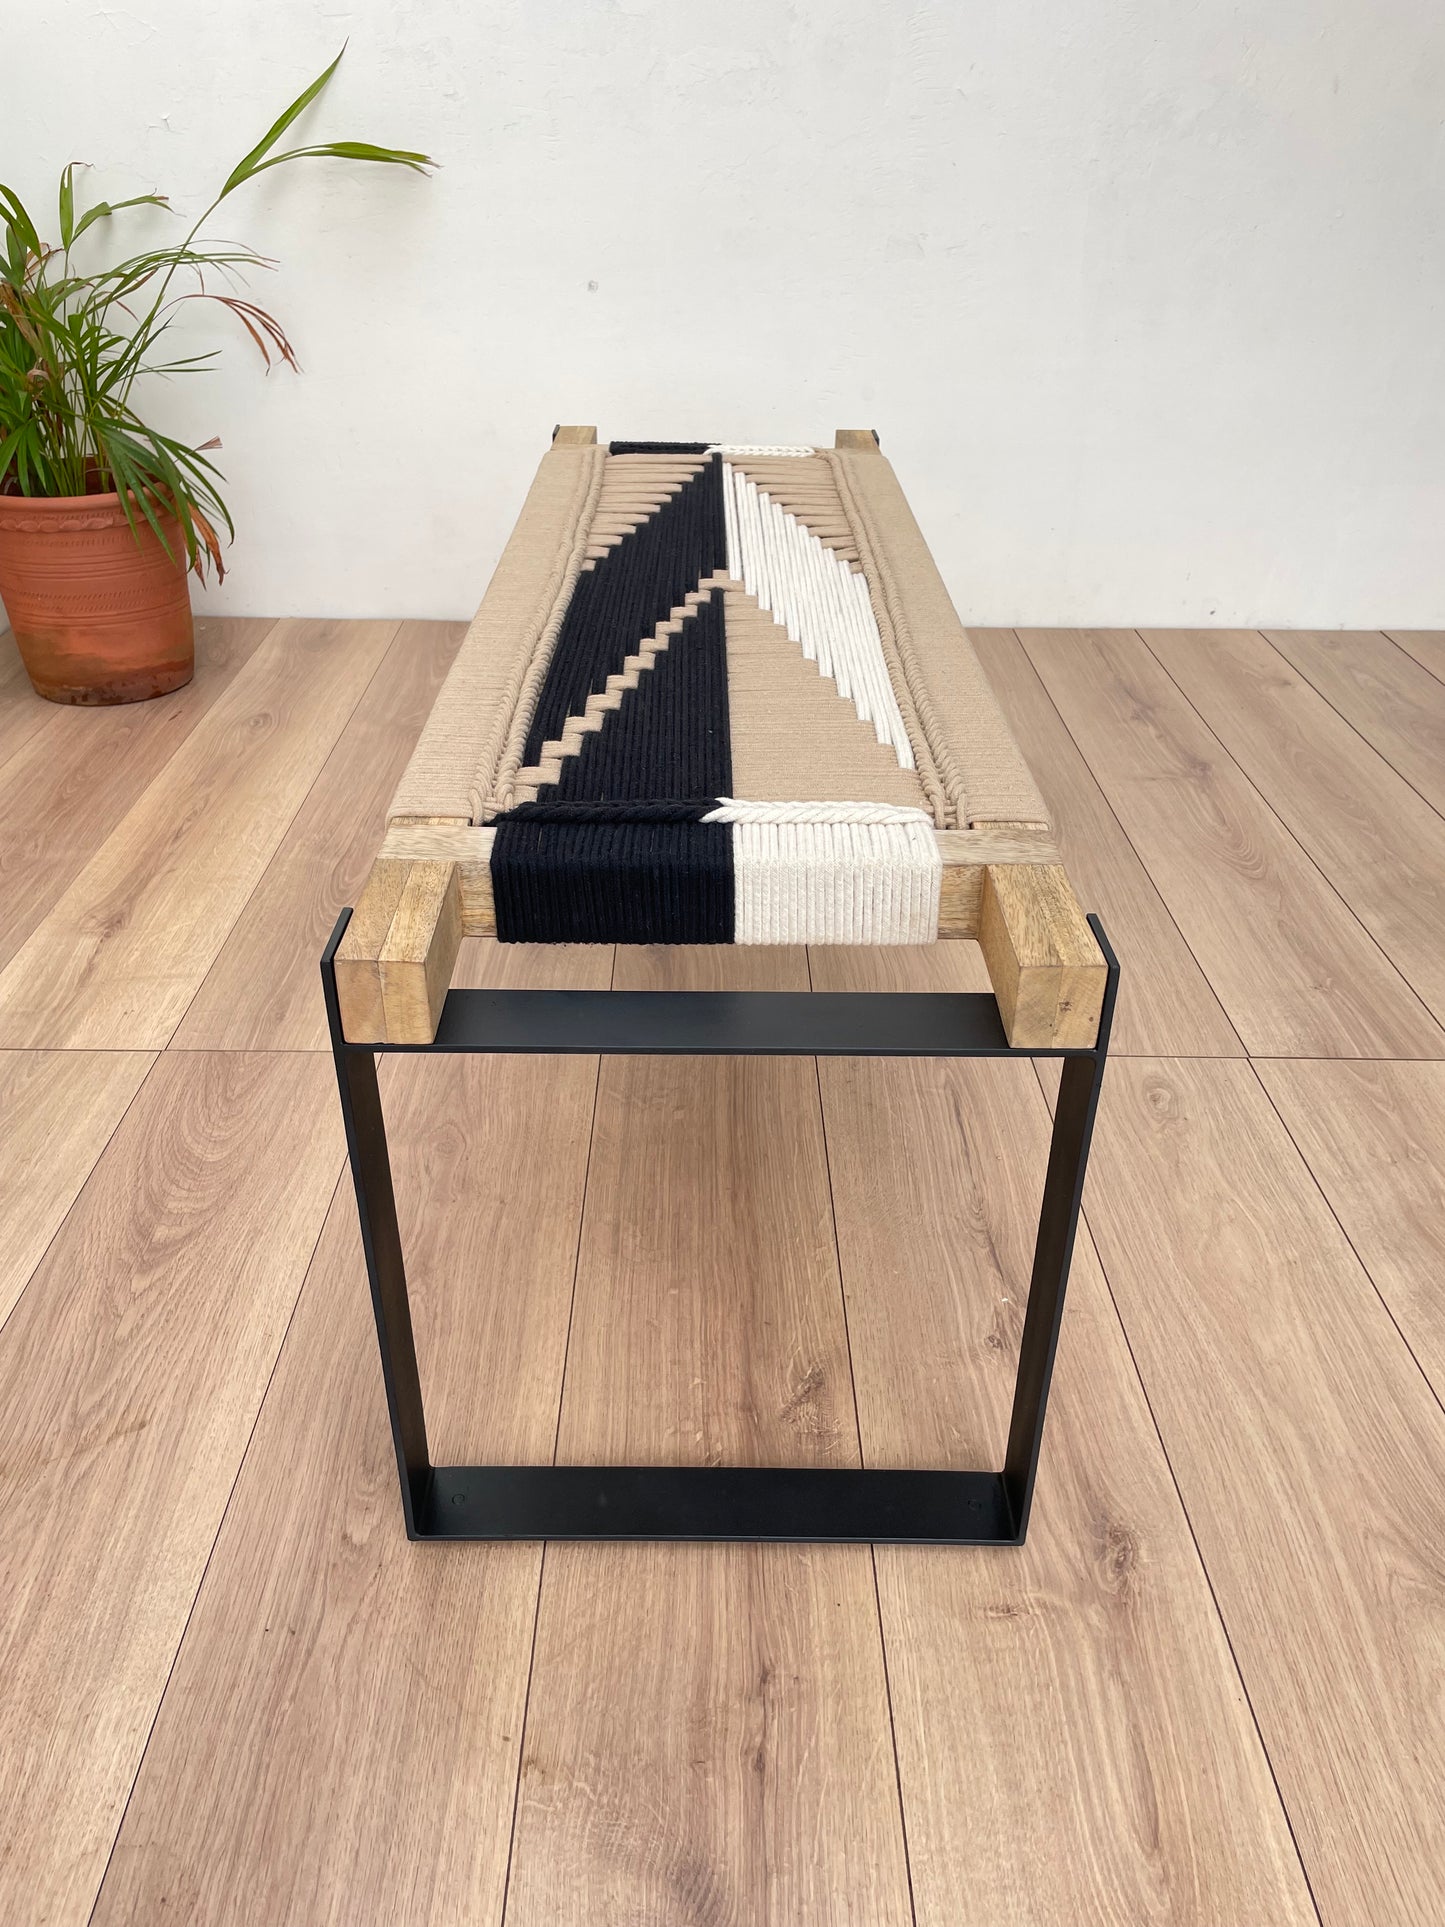 Woven Bench two seater in metal legs - Beige White Black